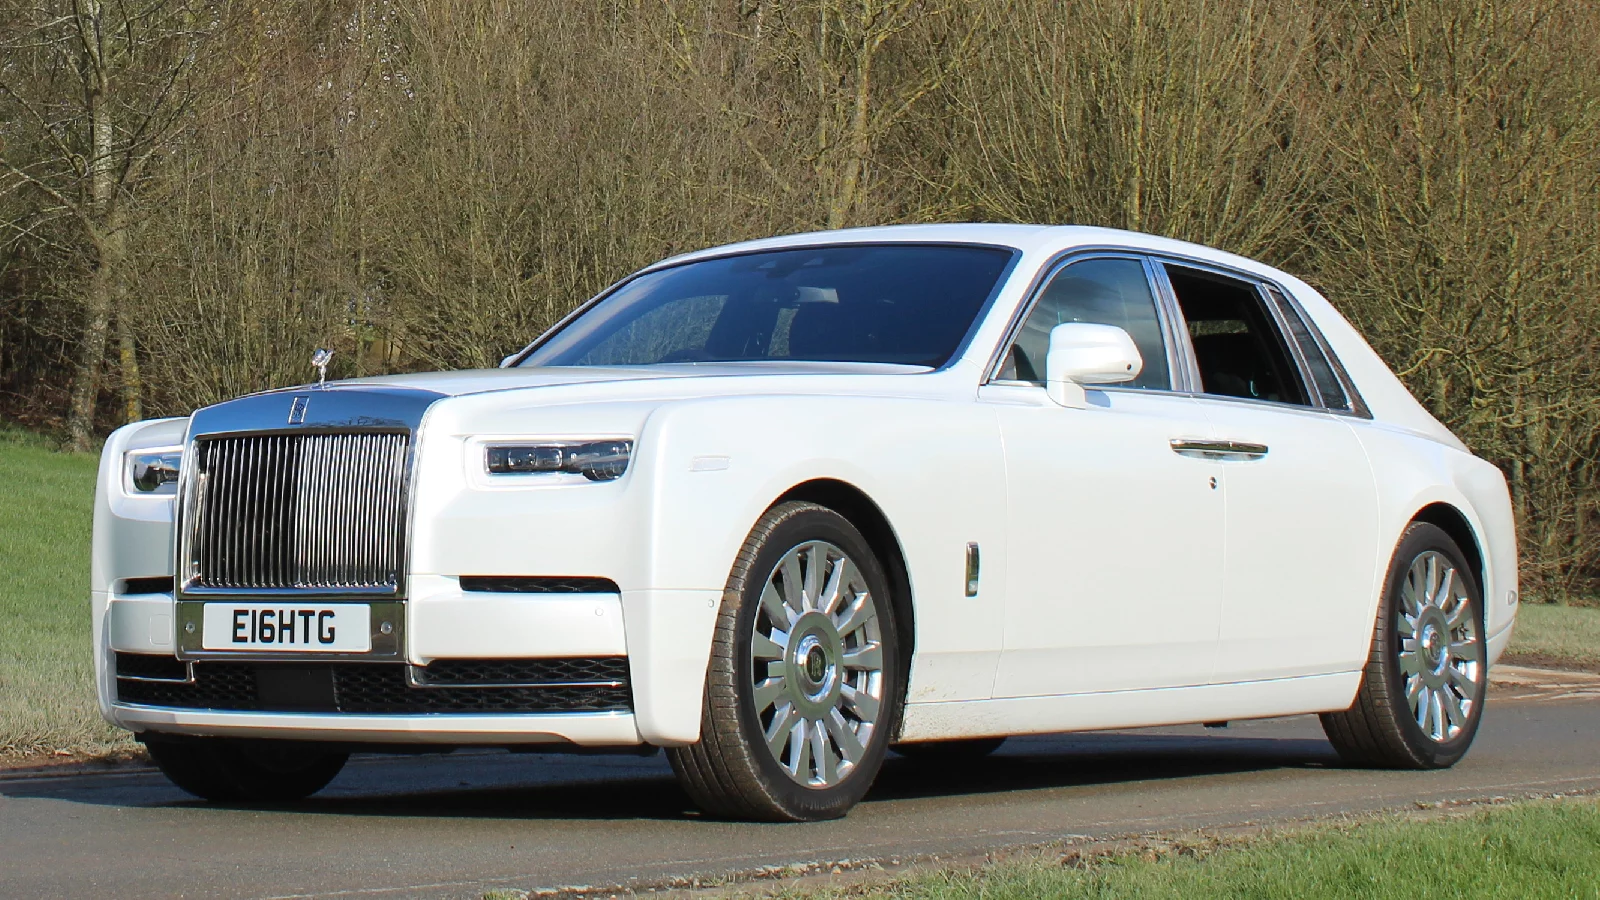 Luxurious White Rolls-Royce Phantom 8 with Black Leather interior seats up to 4 passengers